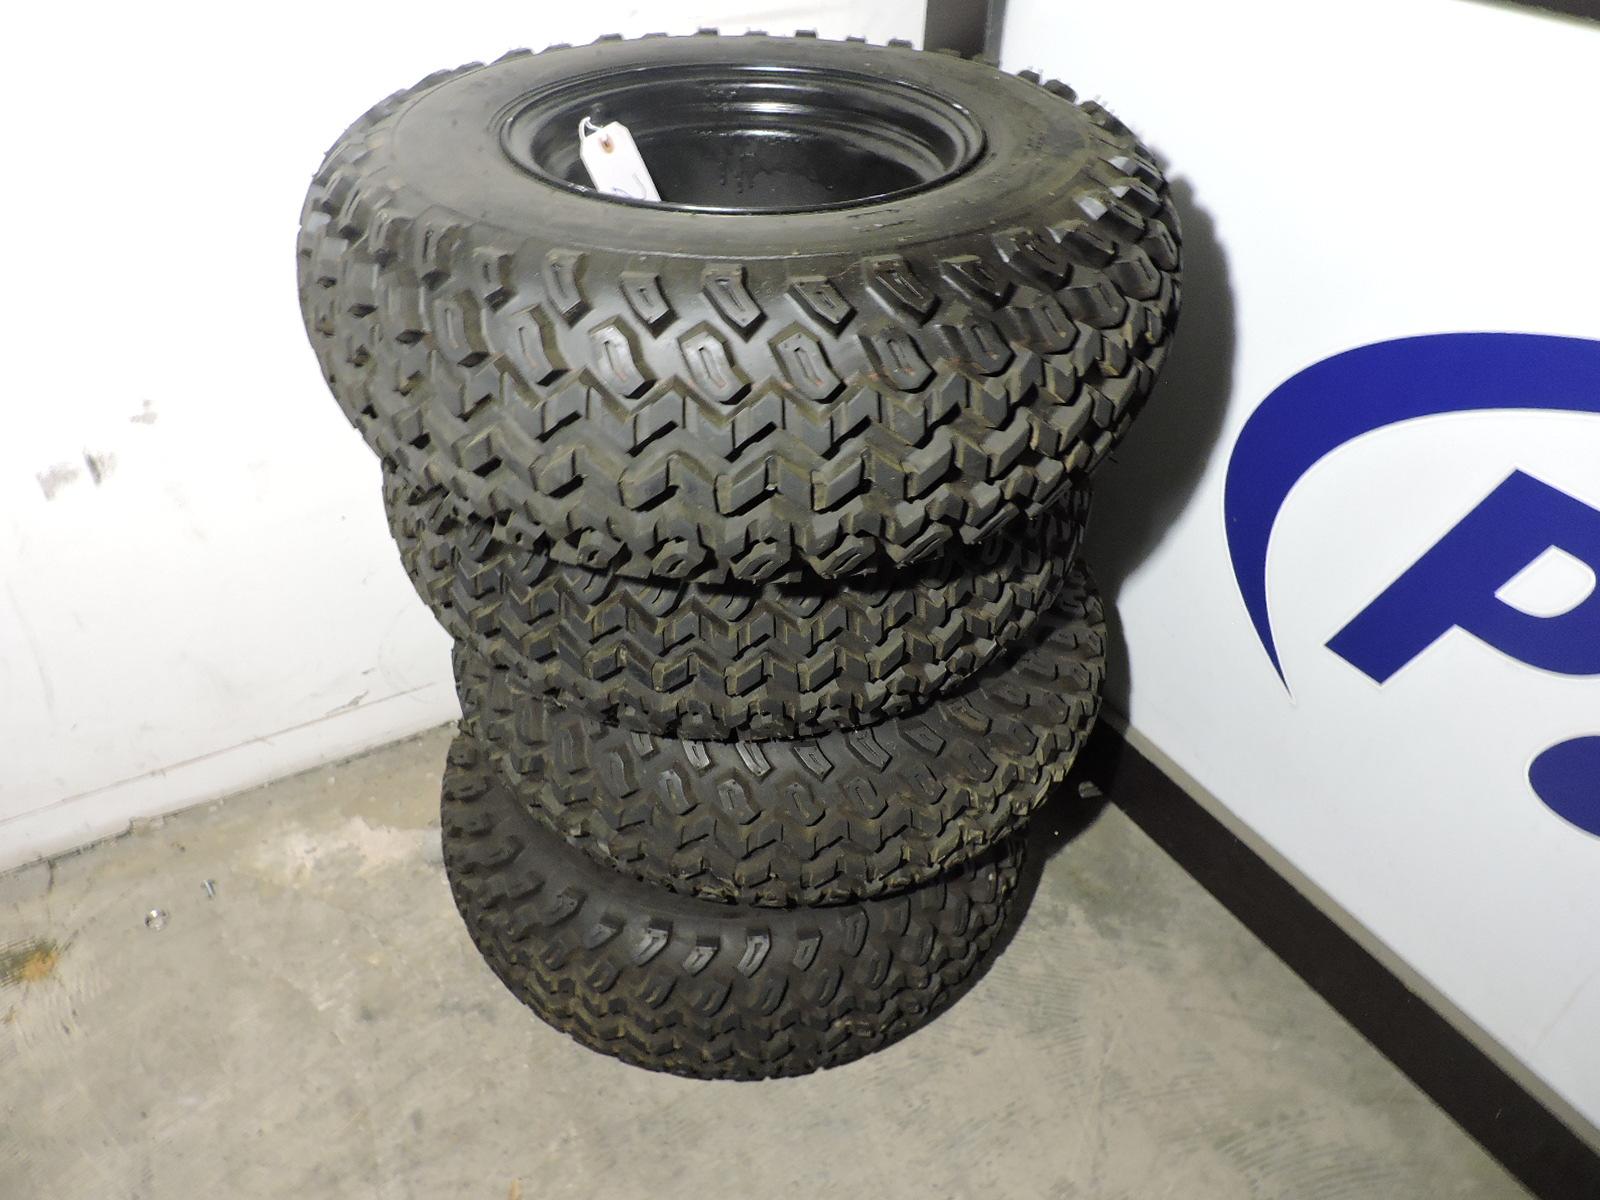 Lot of 4 Utility Vehicle Tires - DURO 25" X 9.0 X 12 with Lugs